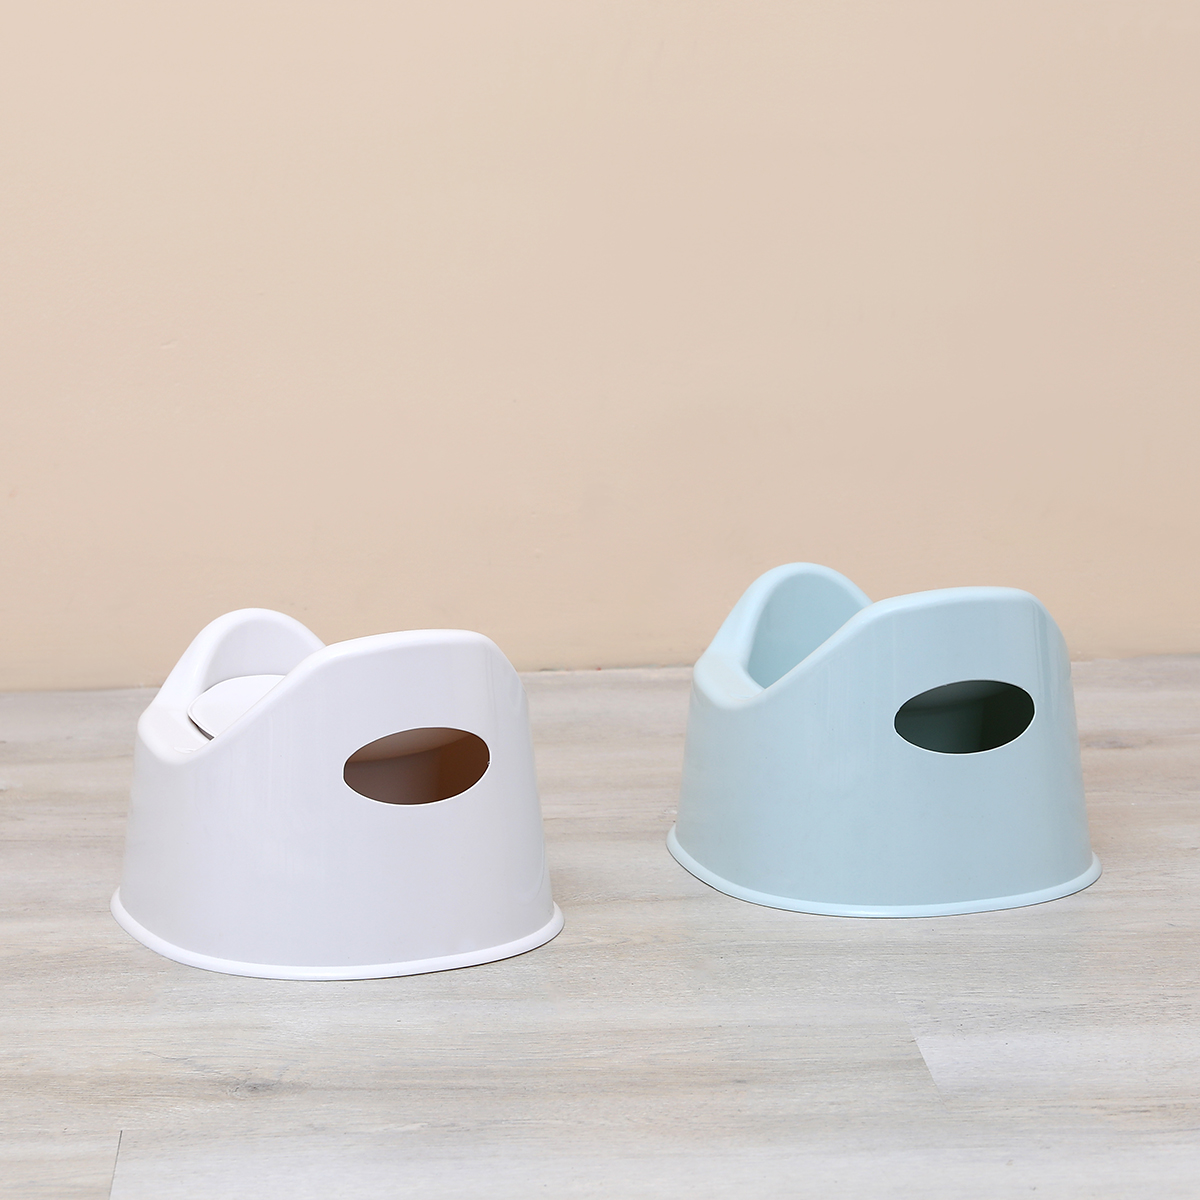 New Arrival Bathroom Simulation Potty Chair Baby Potty Chair For Girl Kids Toilet Training